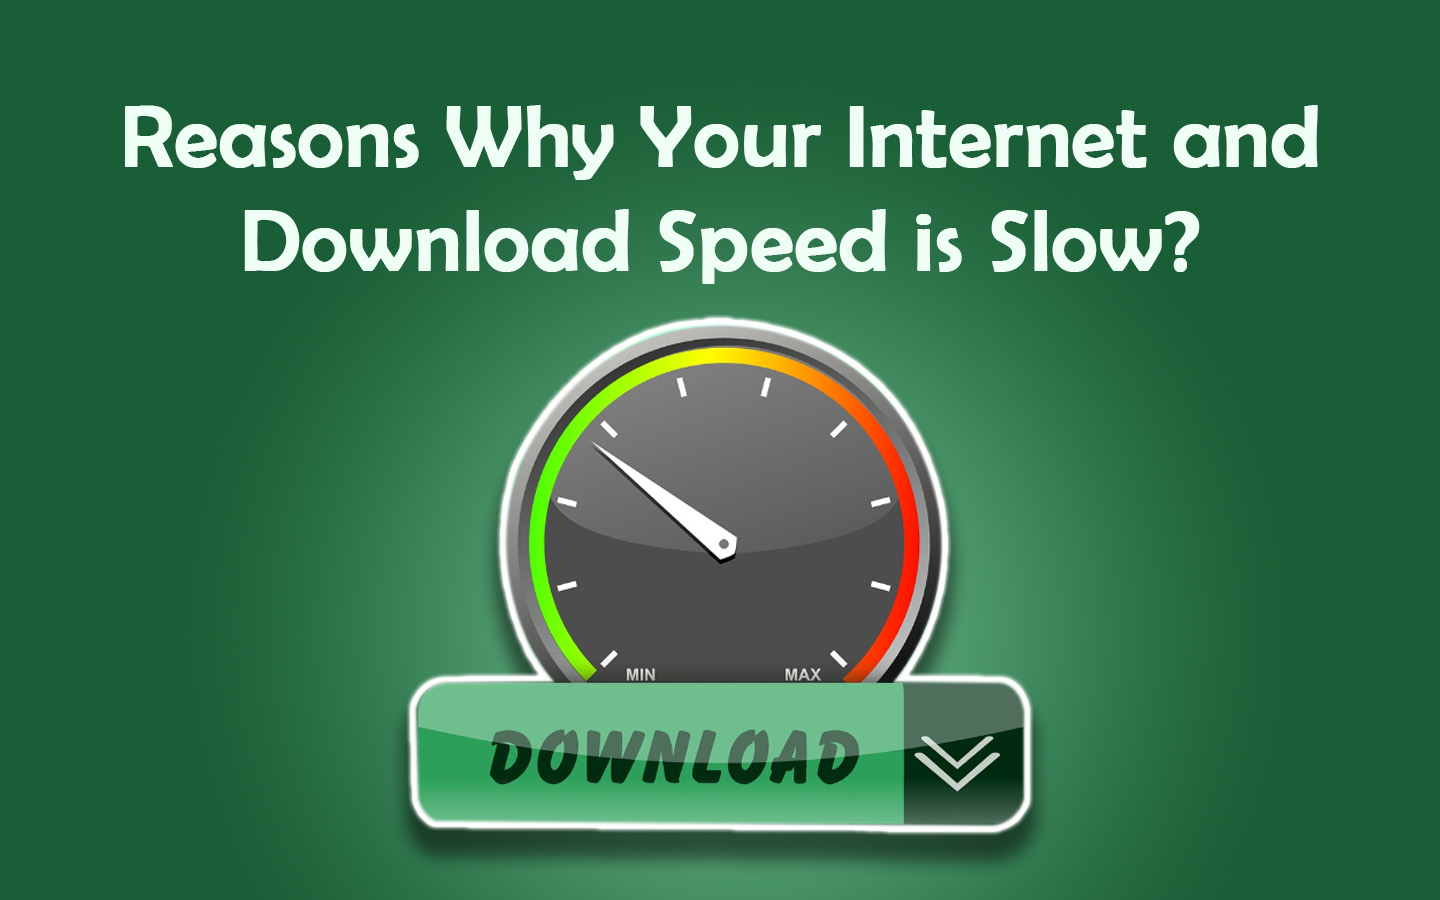 Why Your Internet and Download Speed is Slow